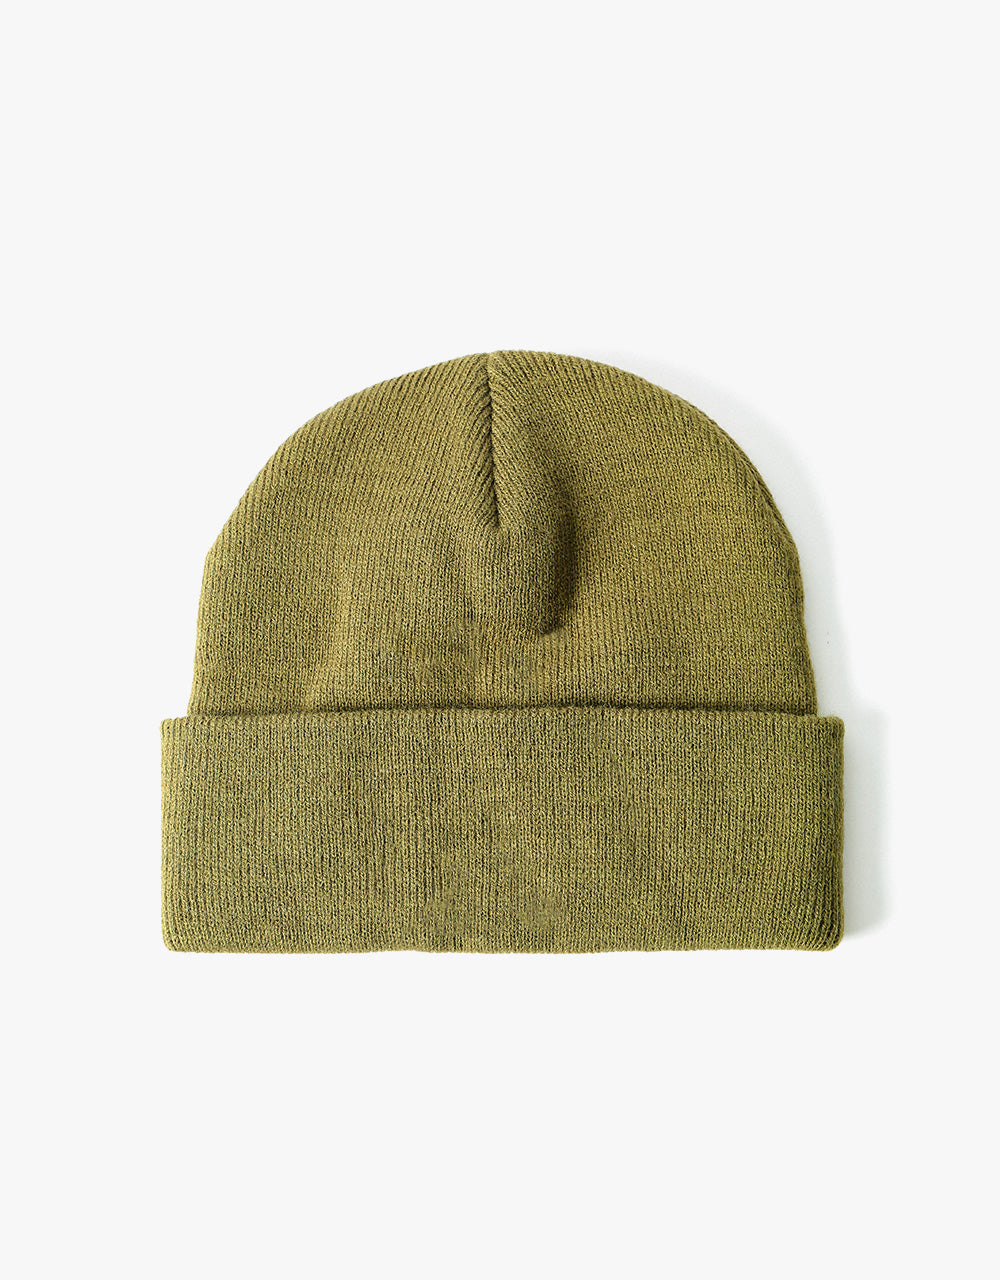 Spitfire Flash Fire Beanie - Olive/Red